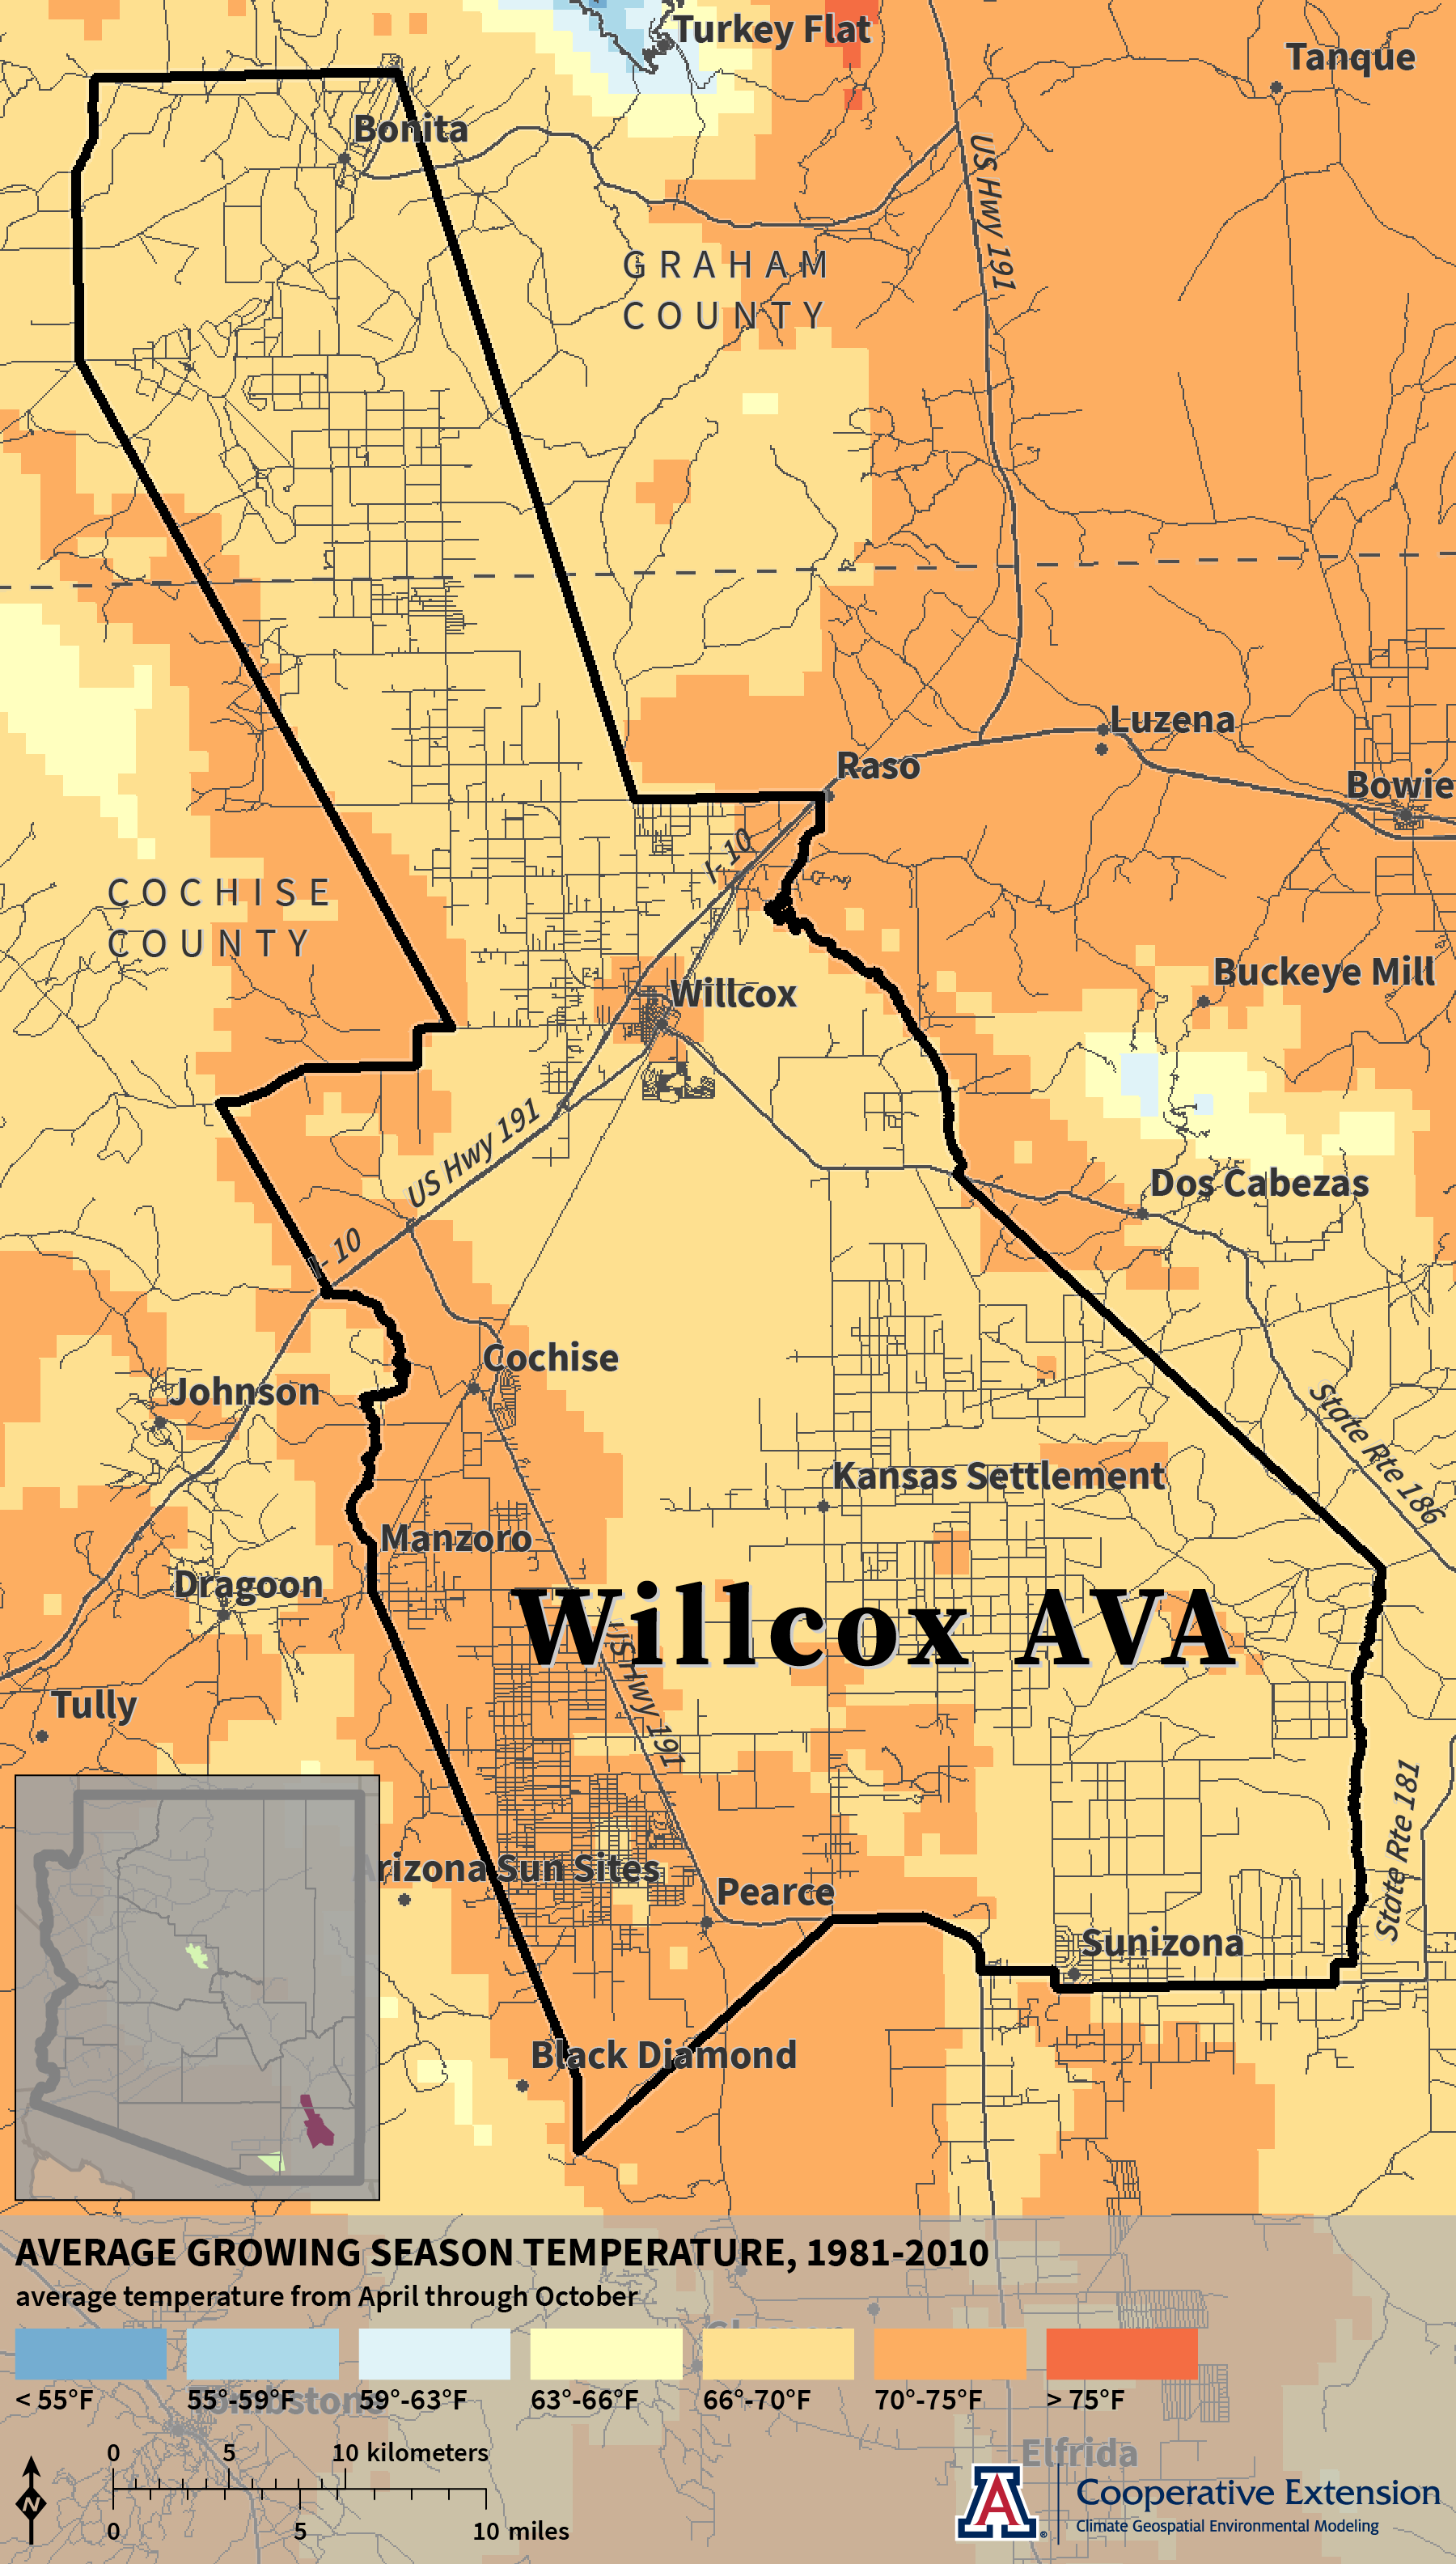 Growing Season Temperature map for Willcox AVA